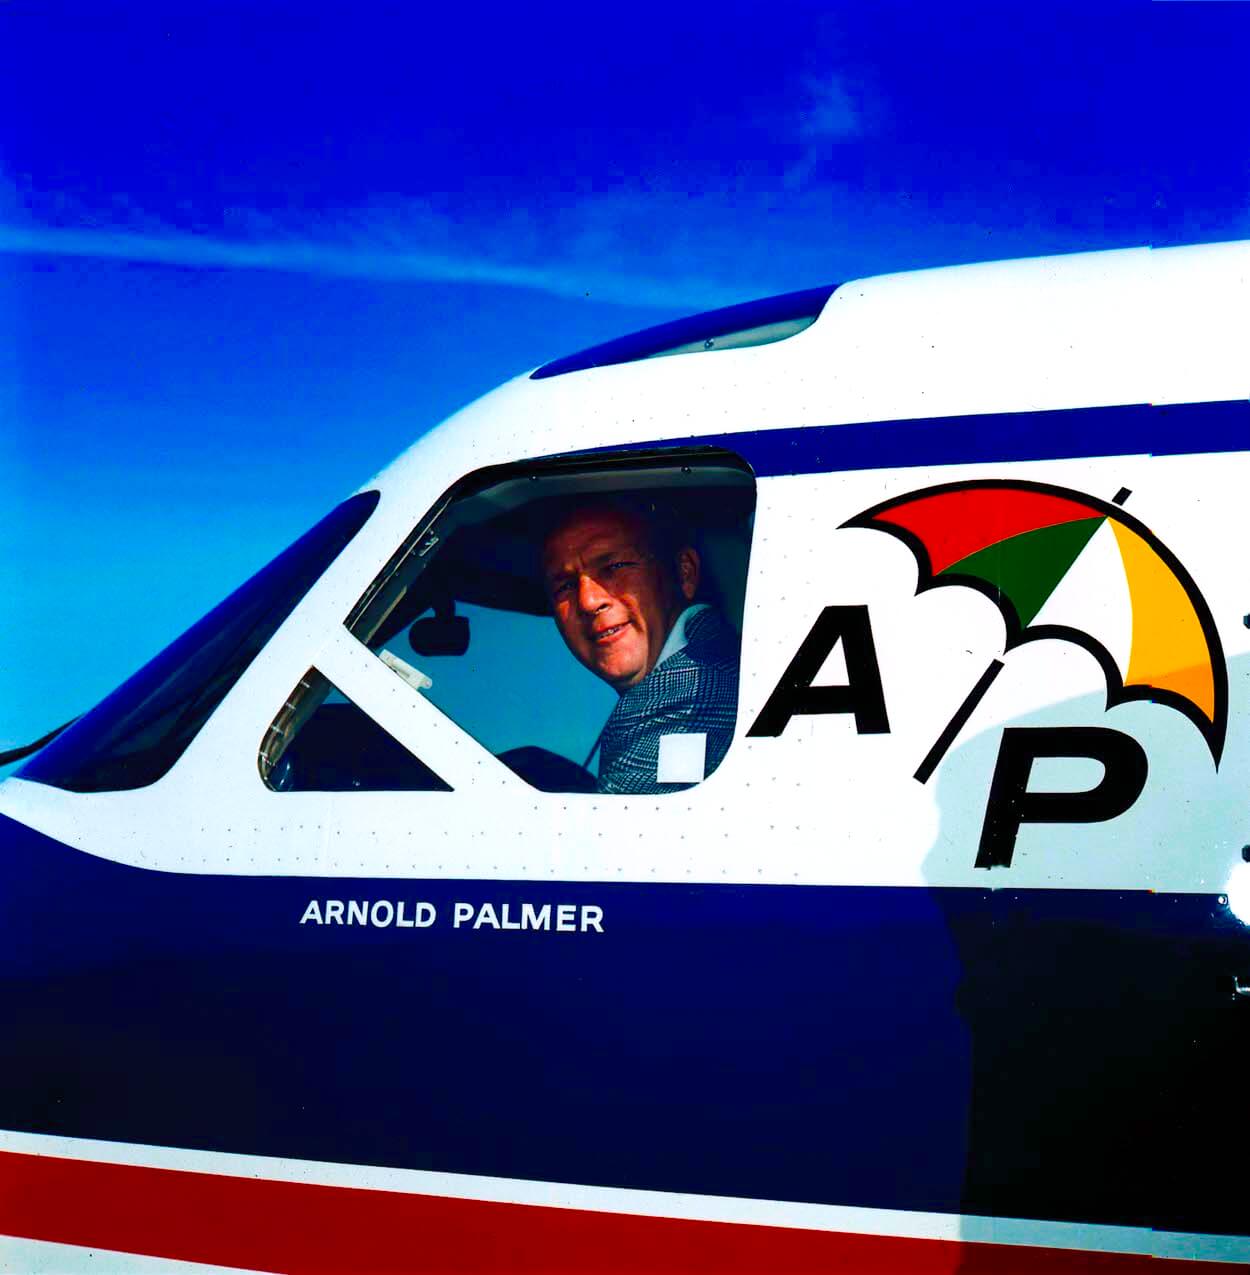 Arnold Palmer looks out the window of his plane.